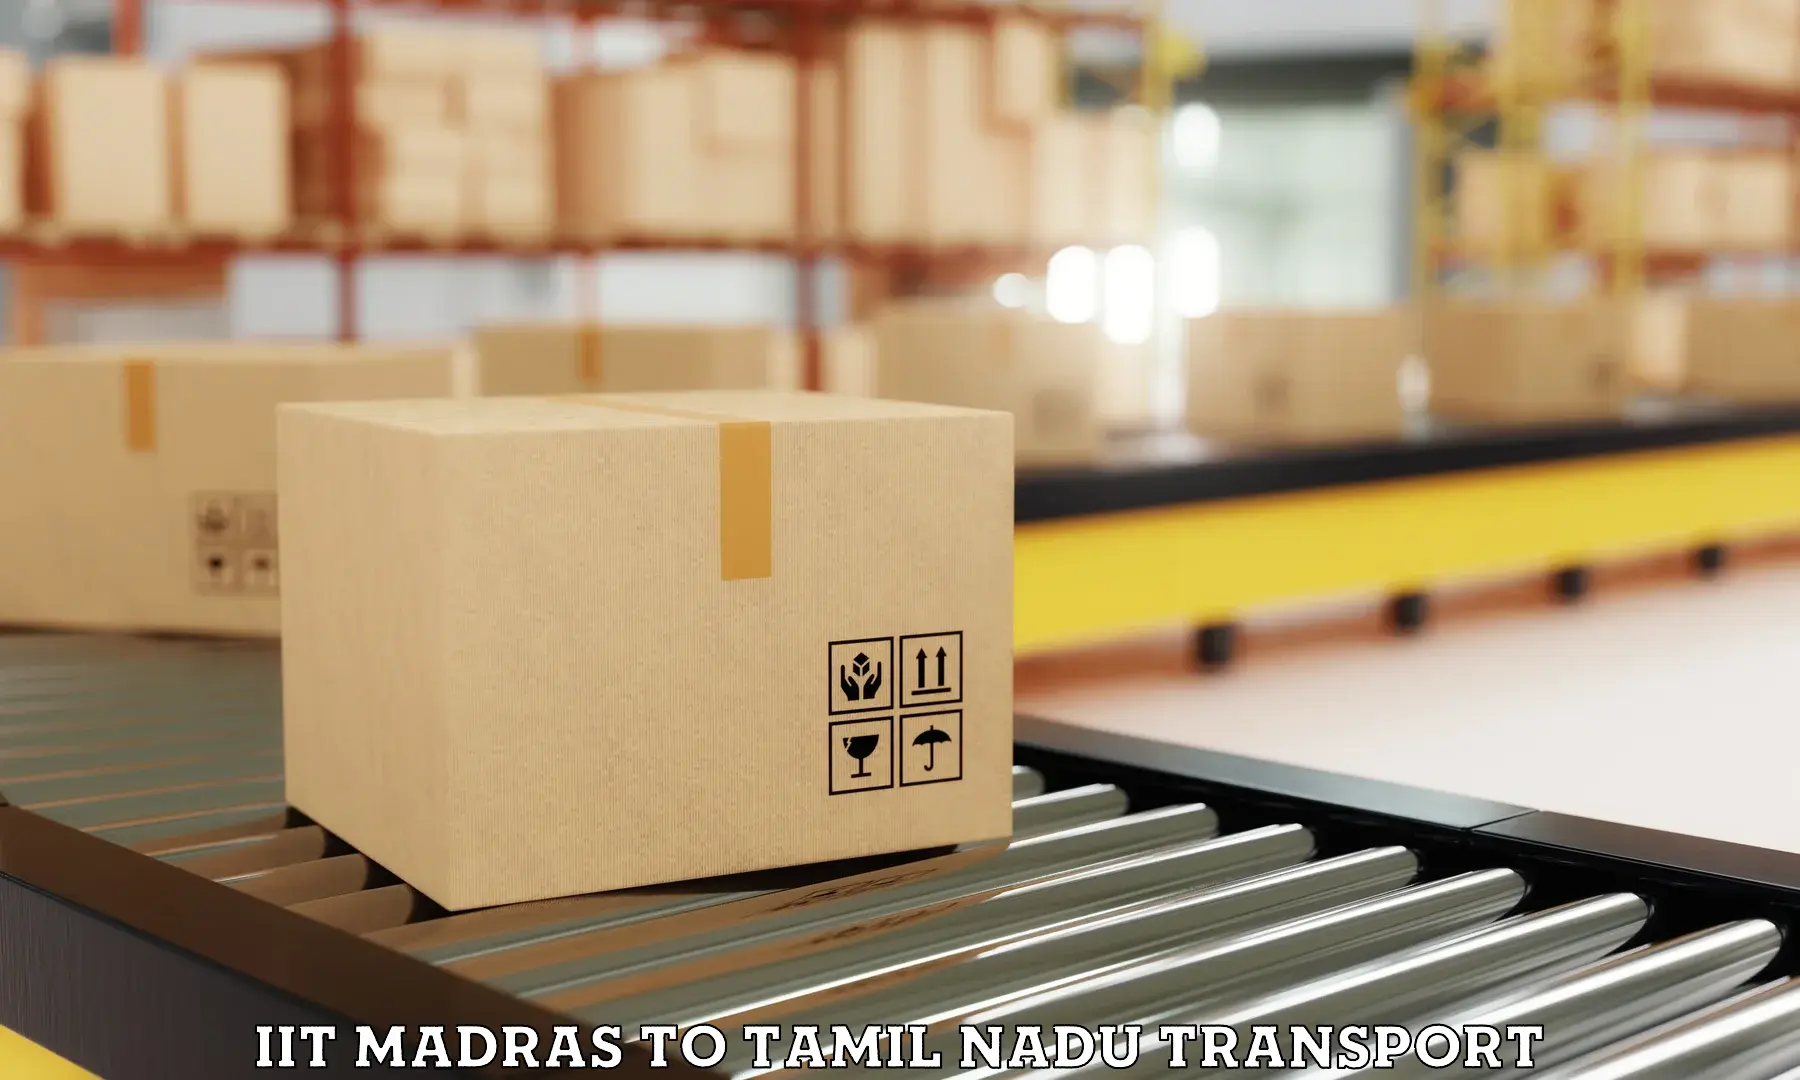 Express transport services IIT Madras to Sirkali